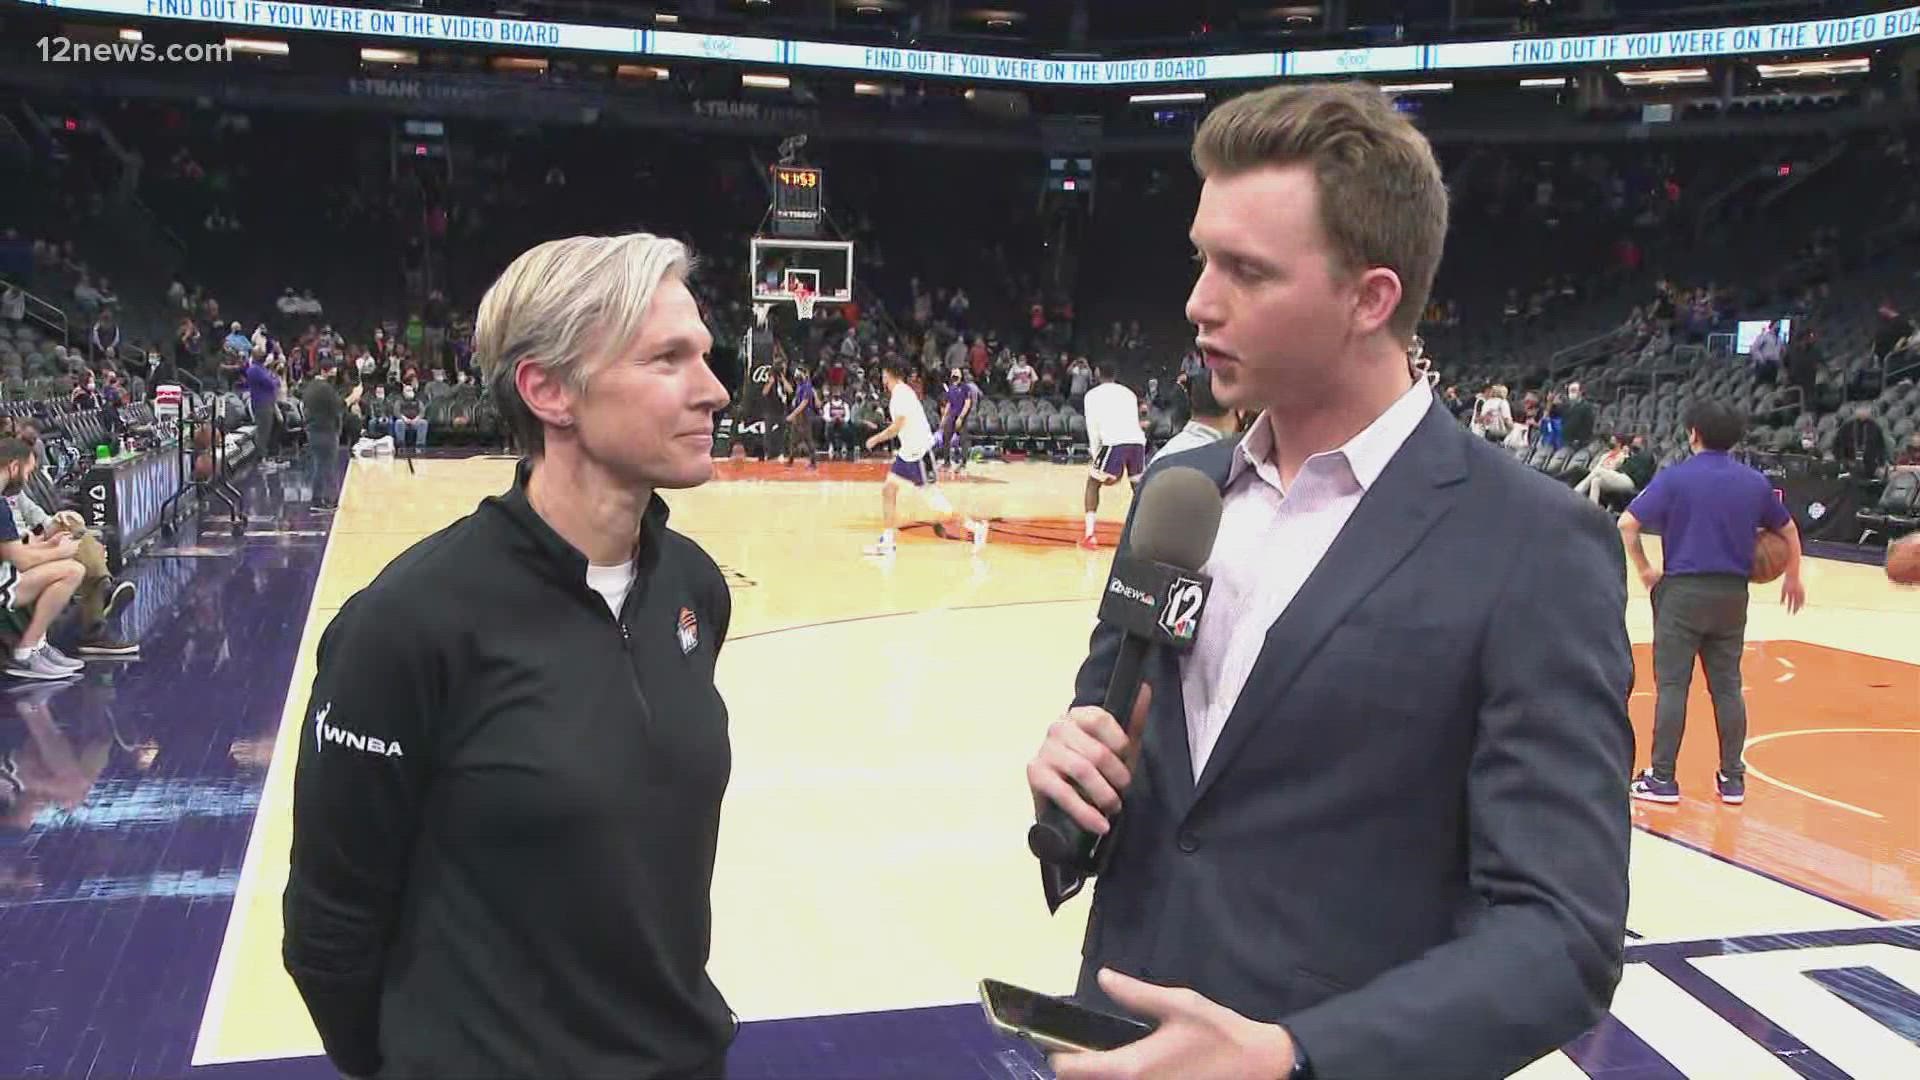 The Phoenix Mercury is introducing their new Head Coach Vaness Nygaard. Nygaard is a Valley native and is a former player and assistant coach in the WNBA.